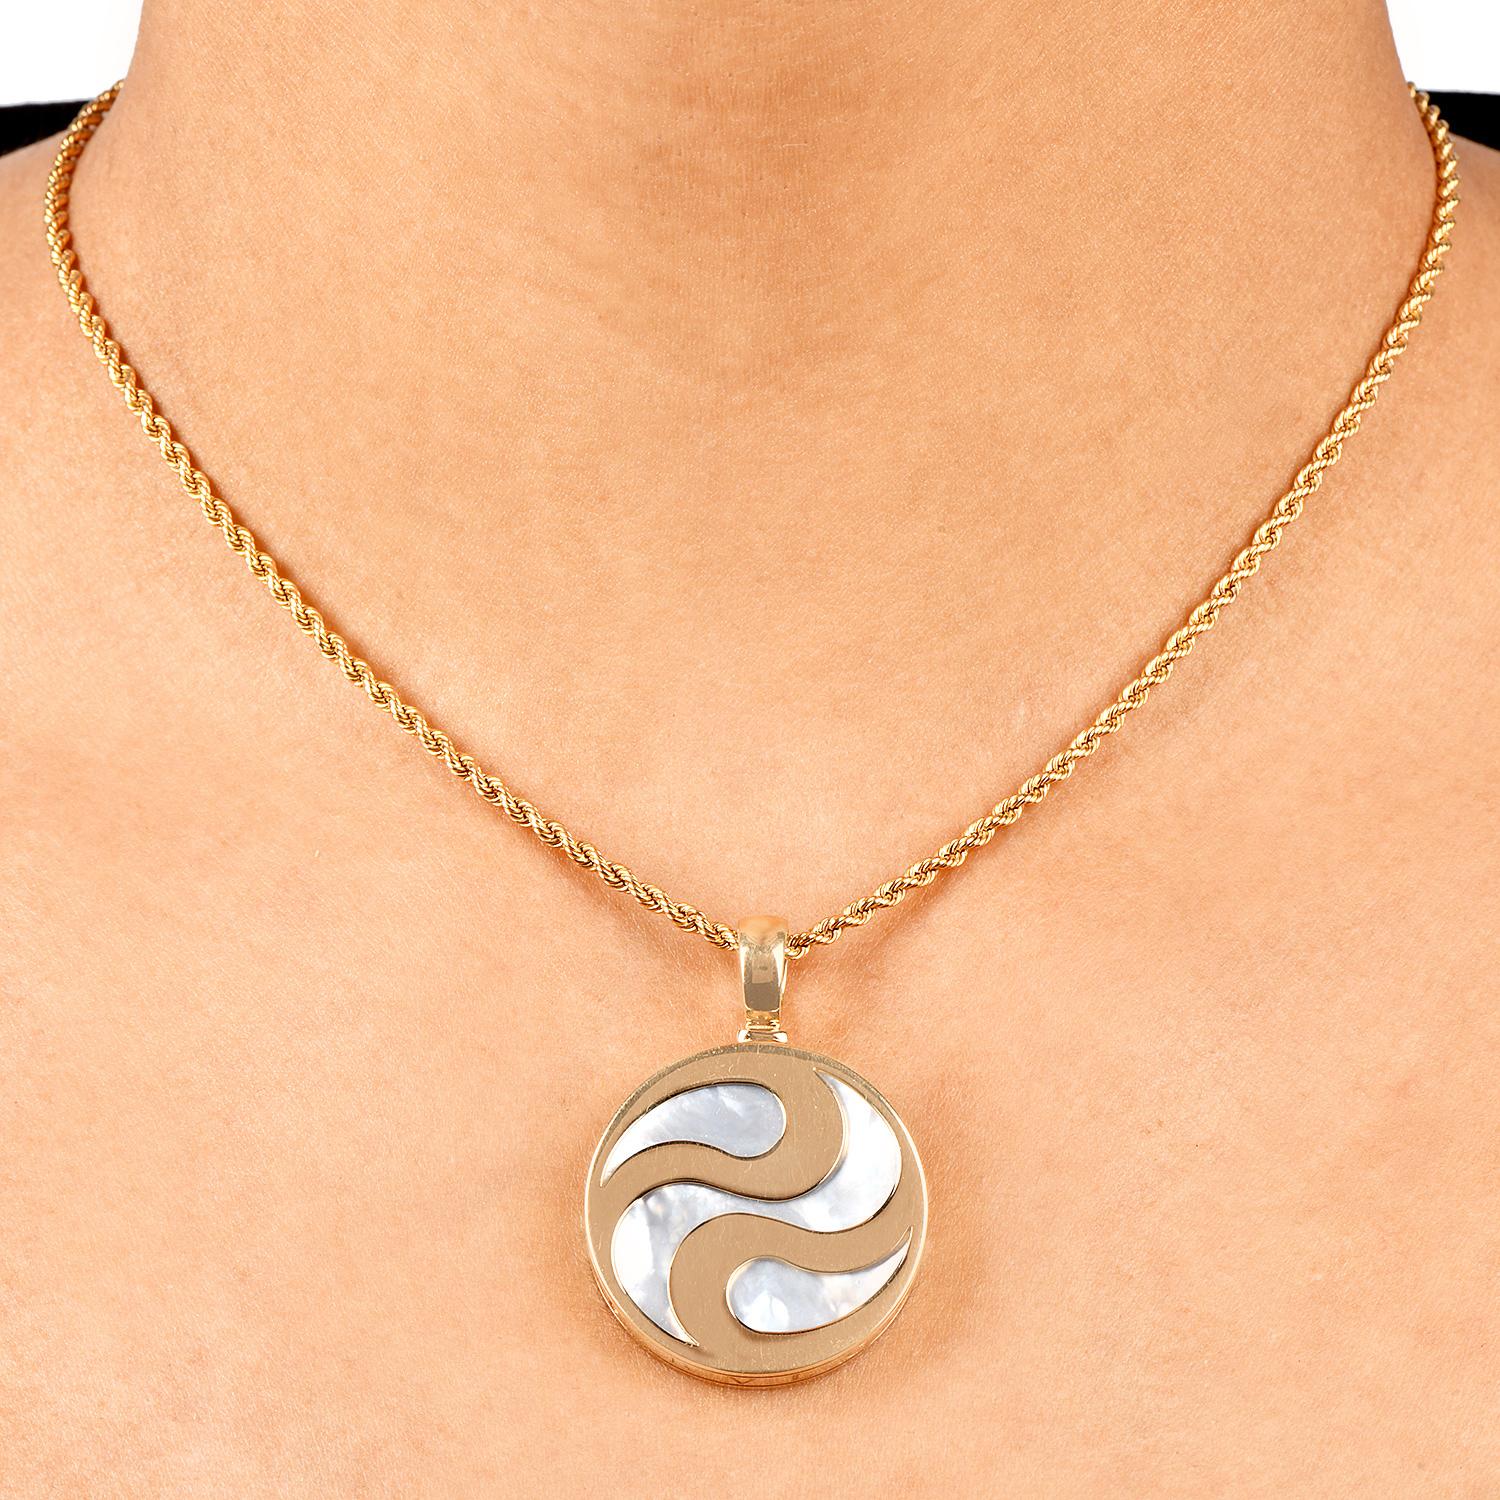 Bvlgari Bulgari Ying Yang 18k Yellow Gold Spinning Pendant In Excellent Condition For Sale In Miami, FL